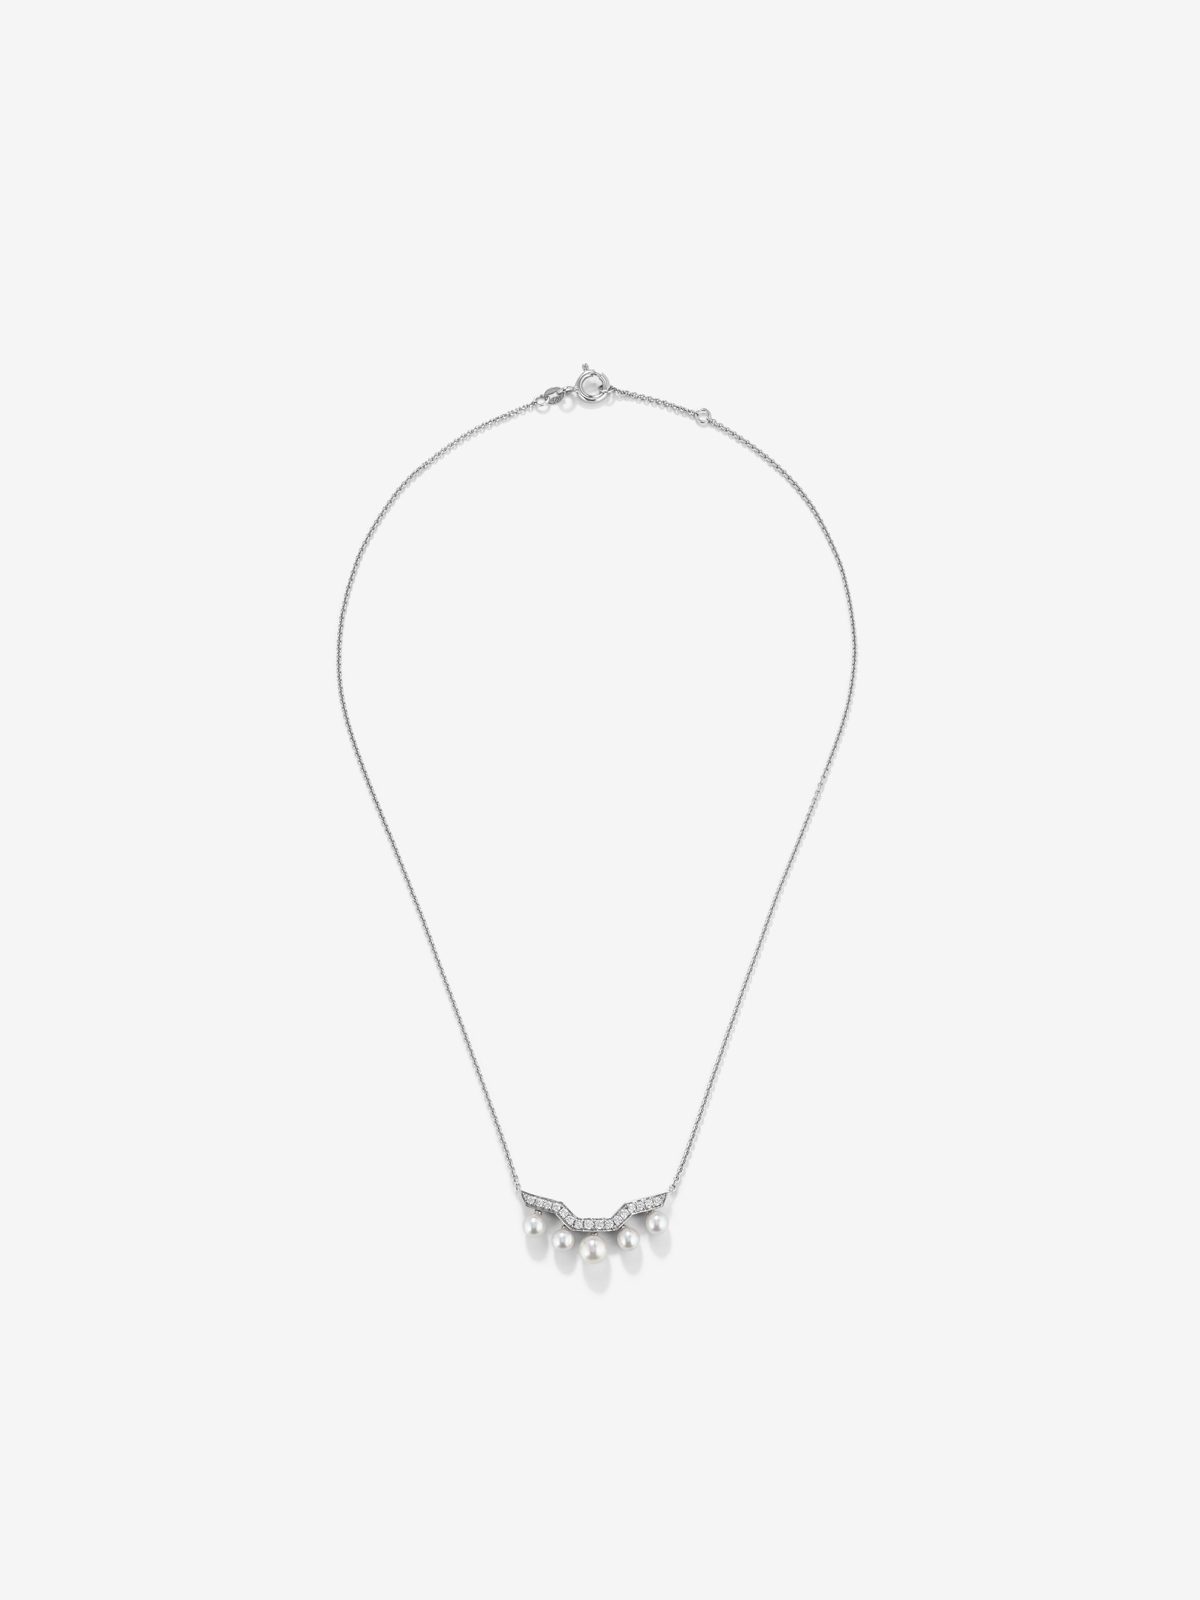 18k white gold pendant chain with five Akoya pearls and diamonds.